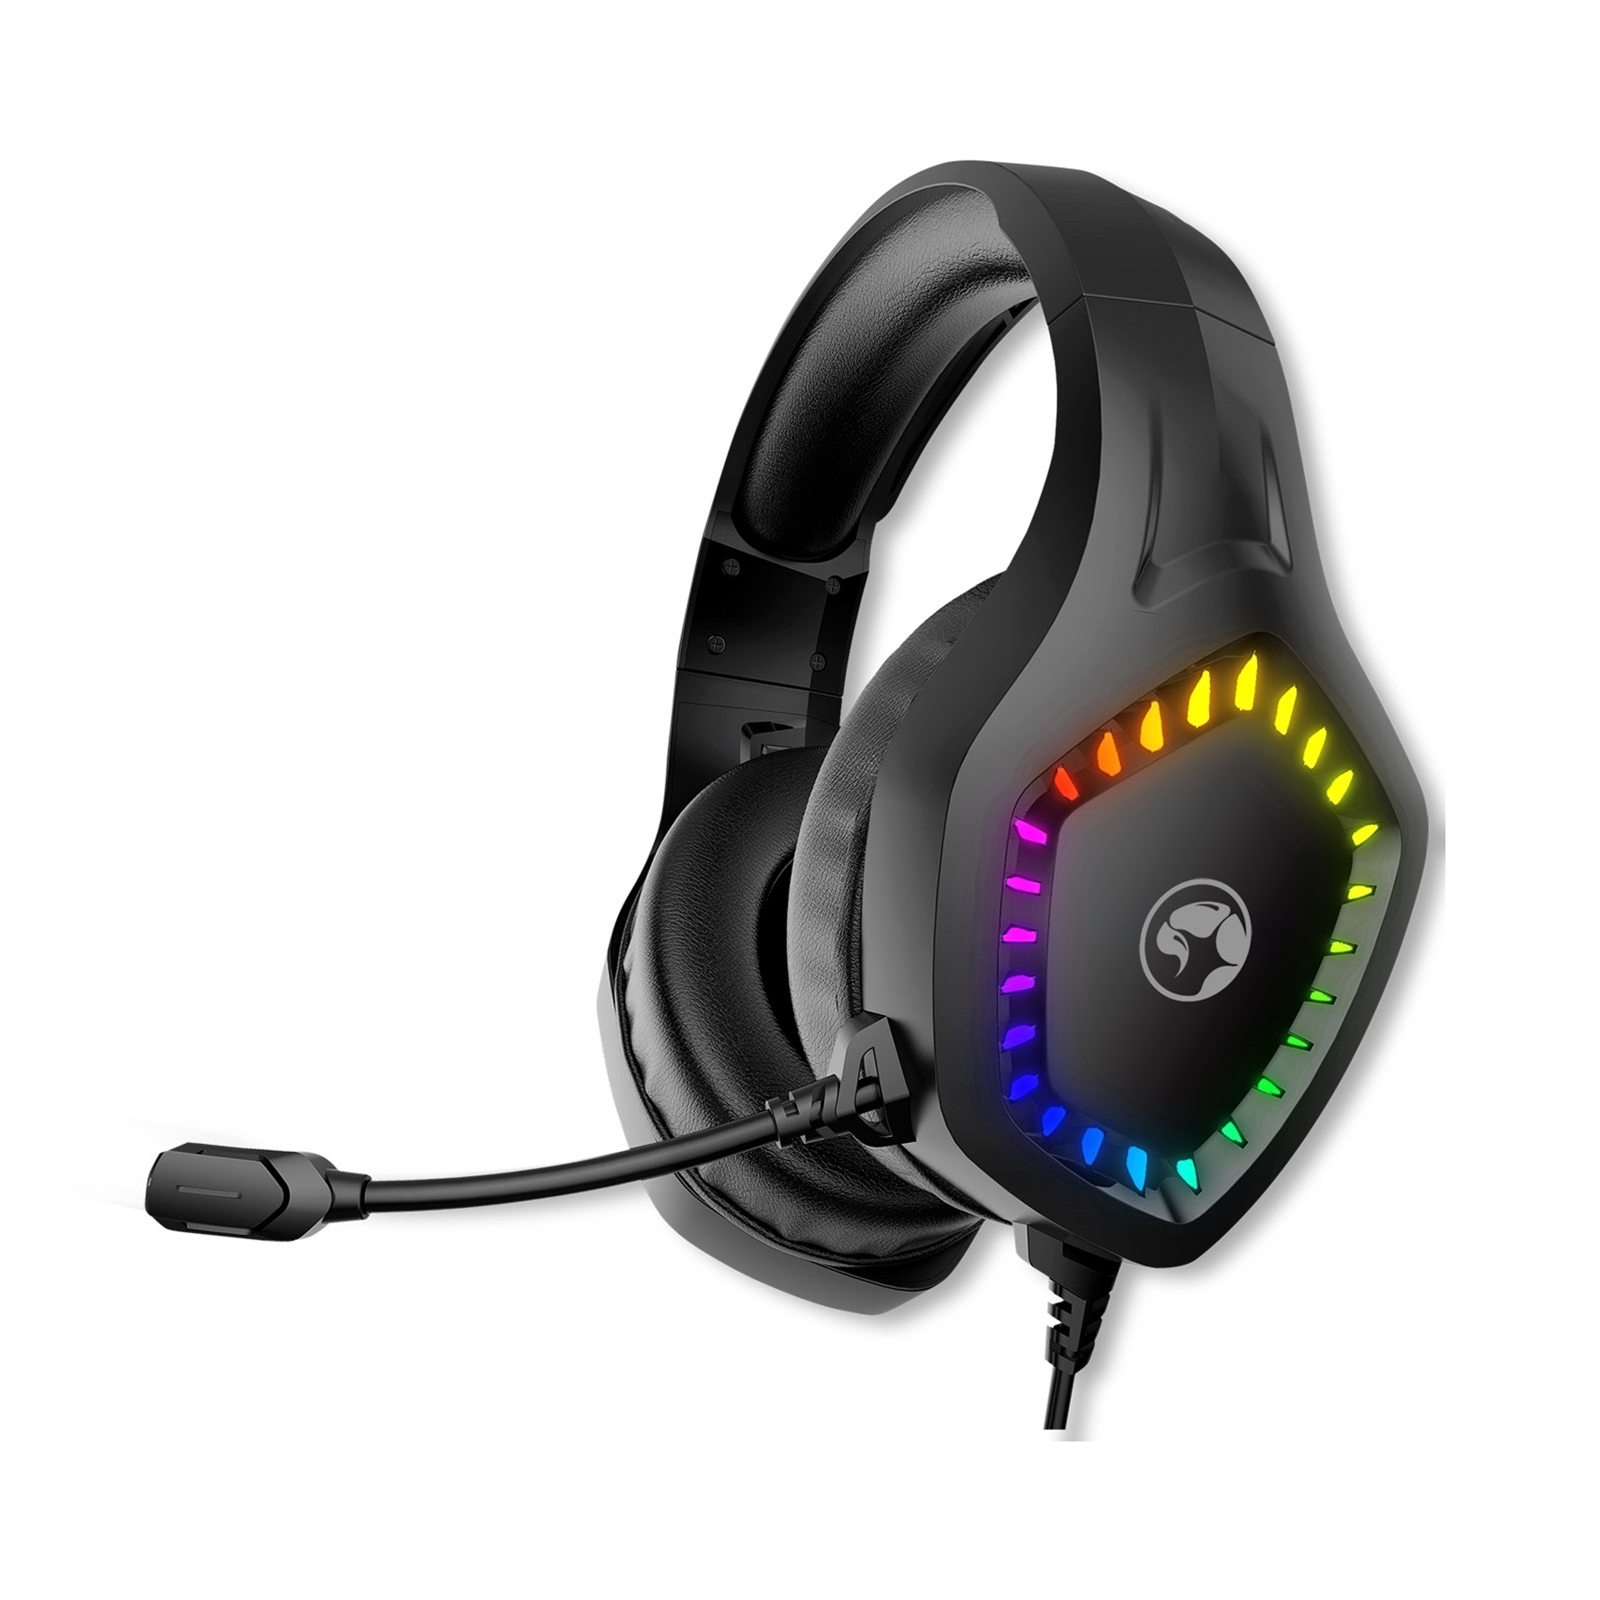 Marvo Scorpion H8360 Gaming Headphones, USB and 3.5mm, RGB Gaming Headset - PC, Xbox, Switch, PS5 and PS4 Compatible, Professional 40mm Audio Drivers, Omnidirectional Mic